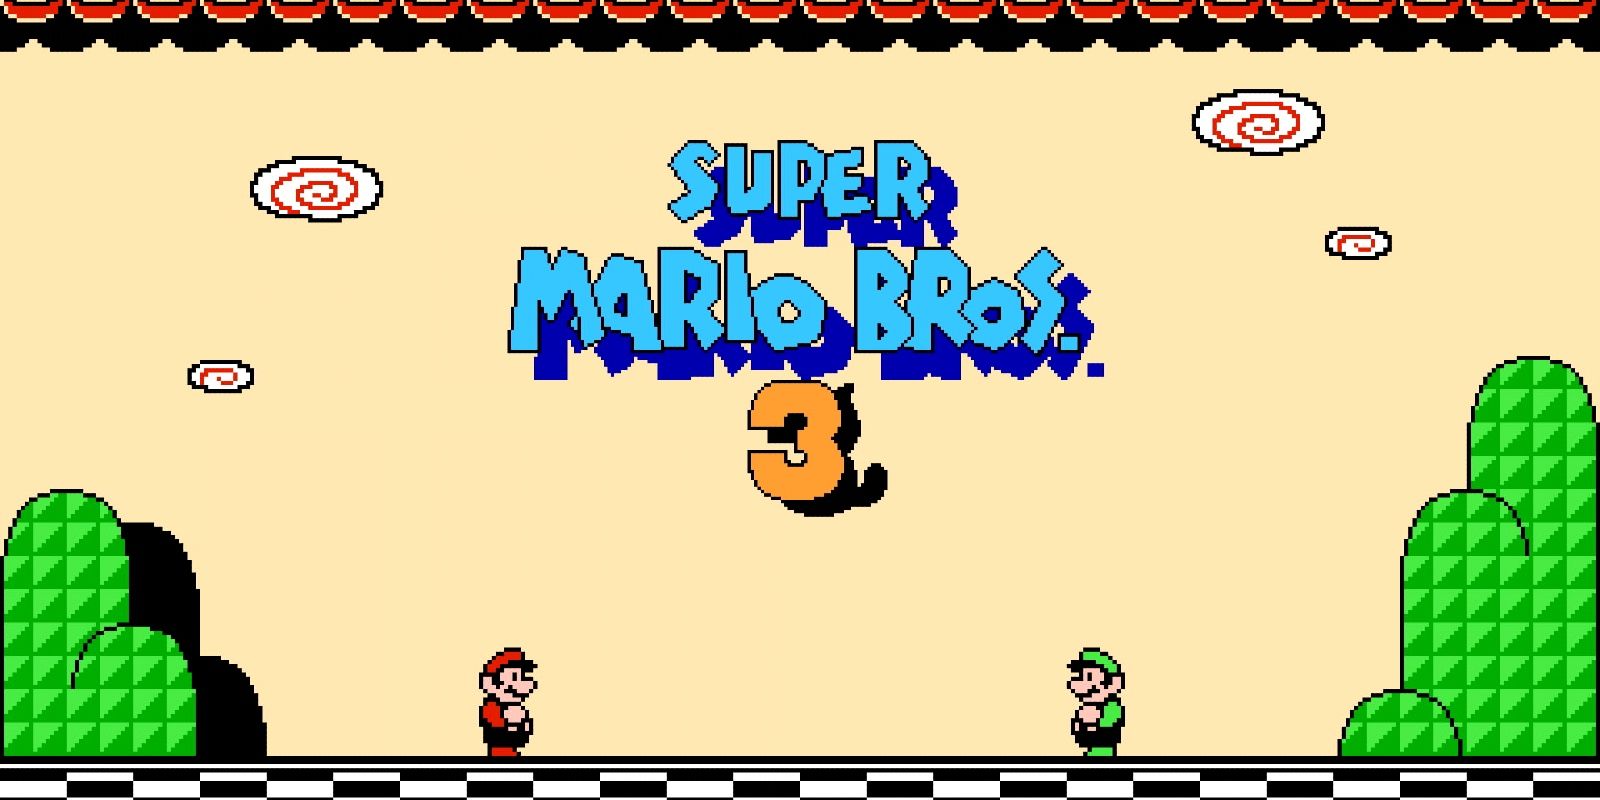 9 Unpopular Opinions About The Super Mario Games According To Reddit